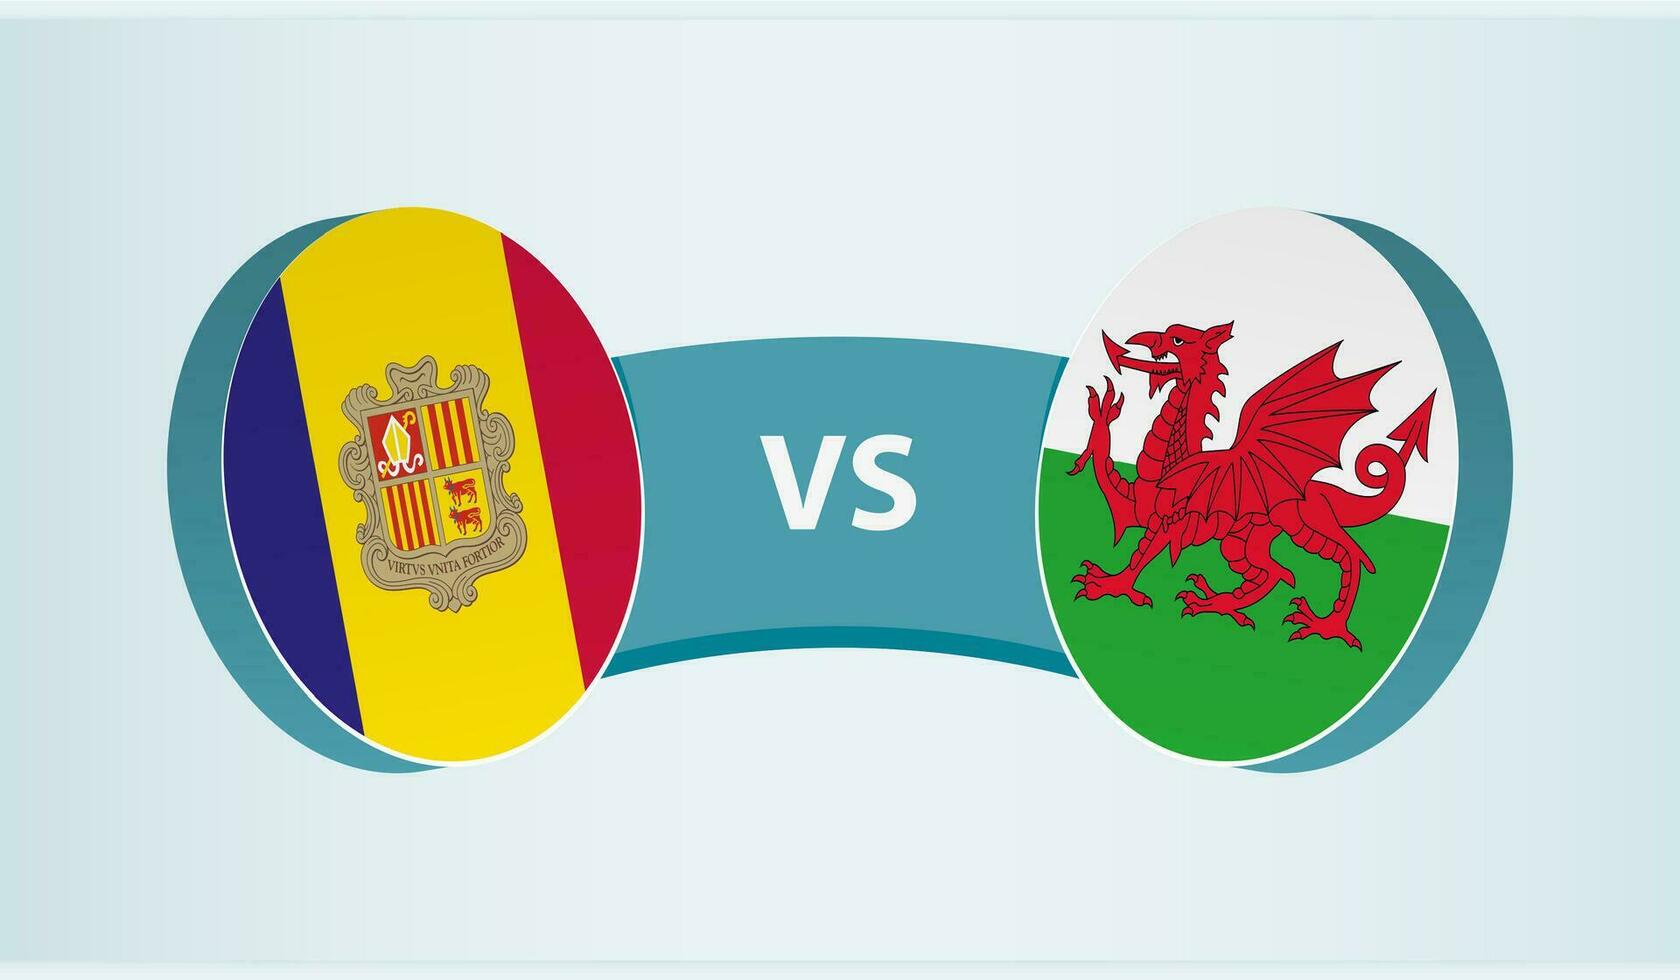 Andorra versus Wales, team sports competition concept. vector